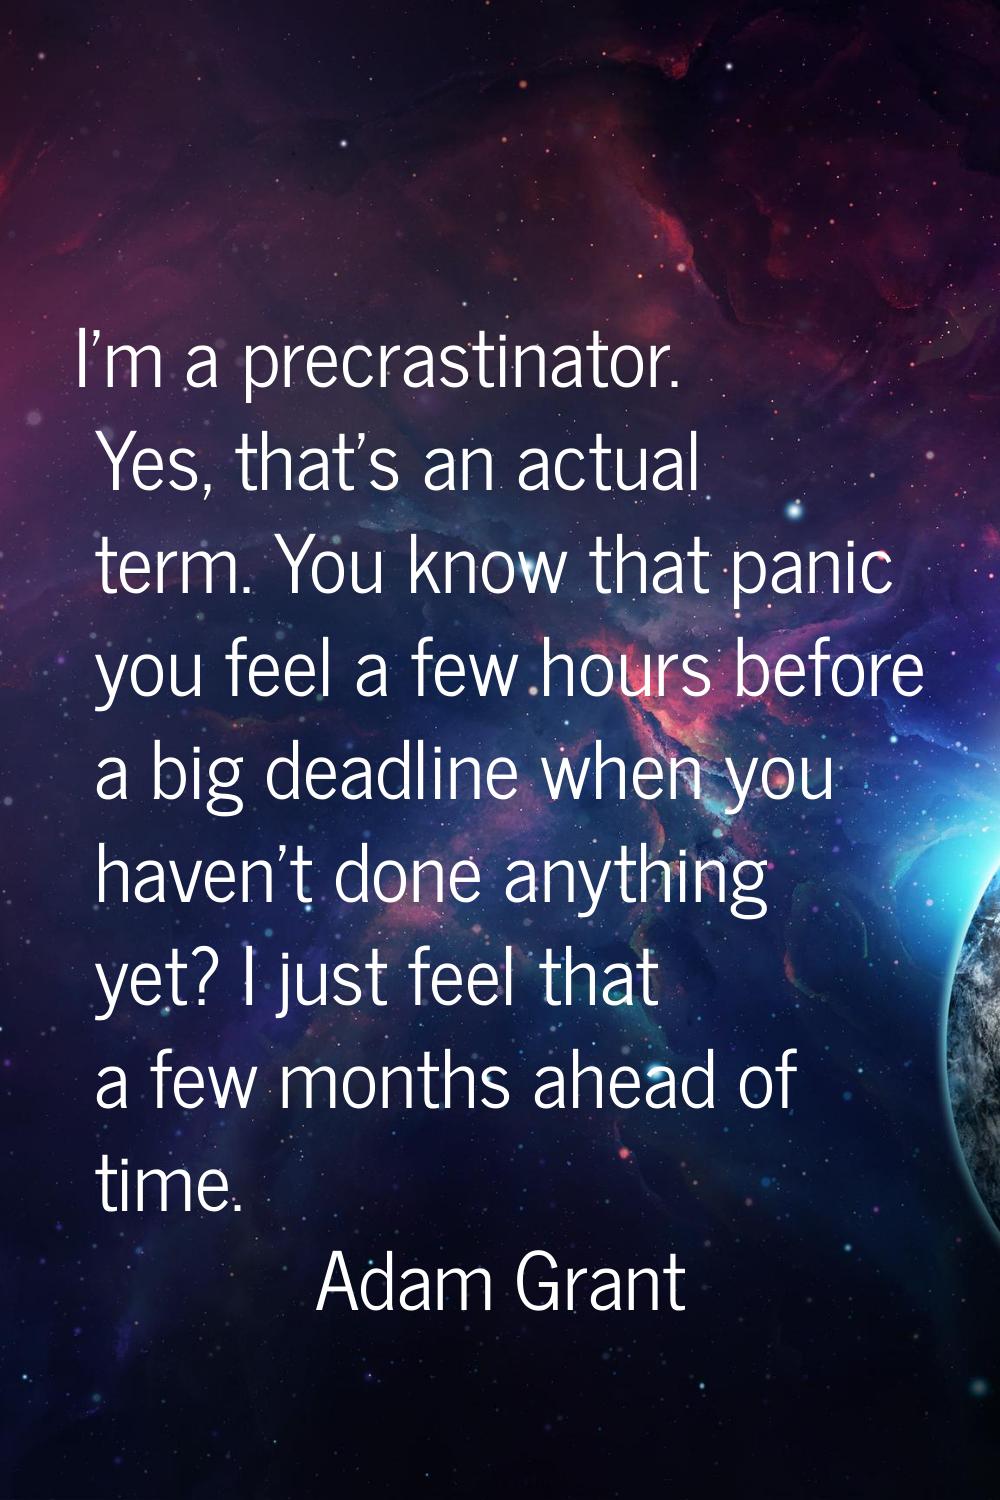 I'm a precrastinator. Yes, that's an actual term. You know that panic you feel a few hours before a